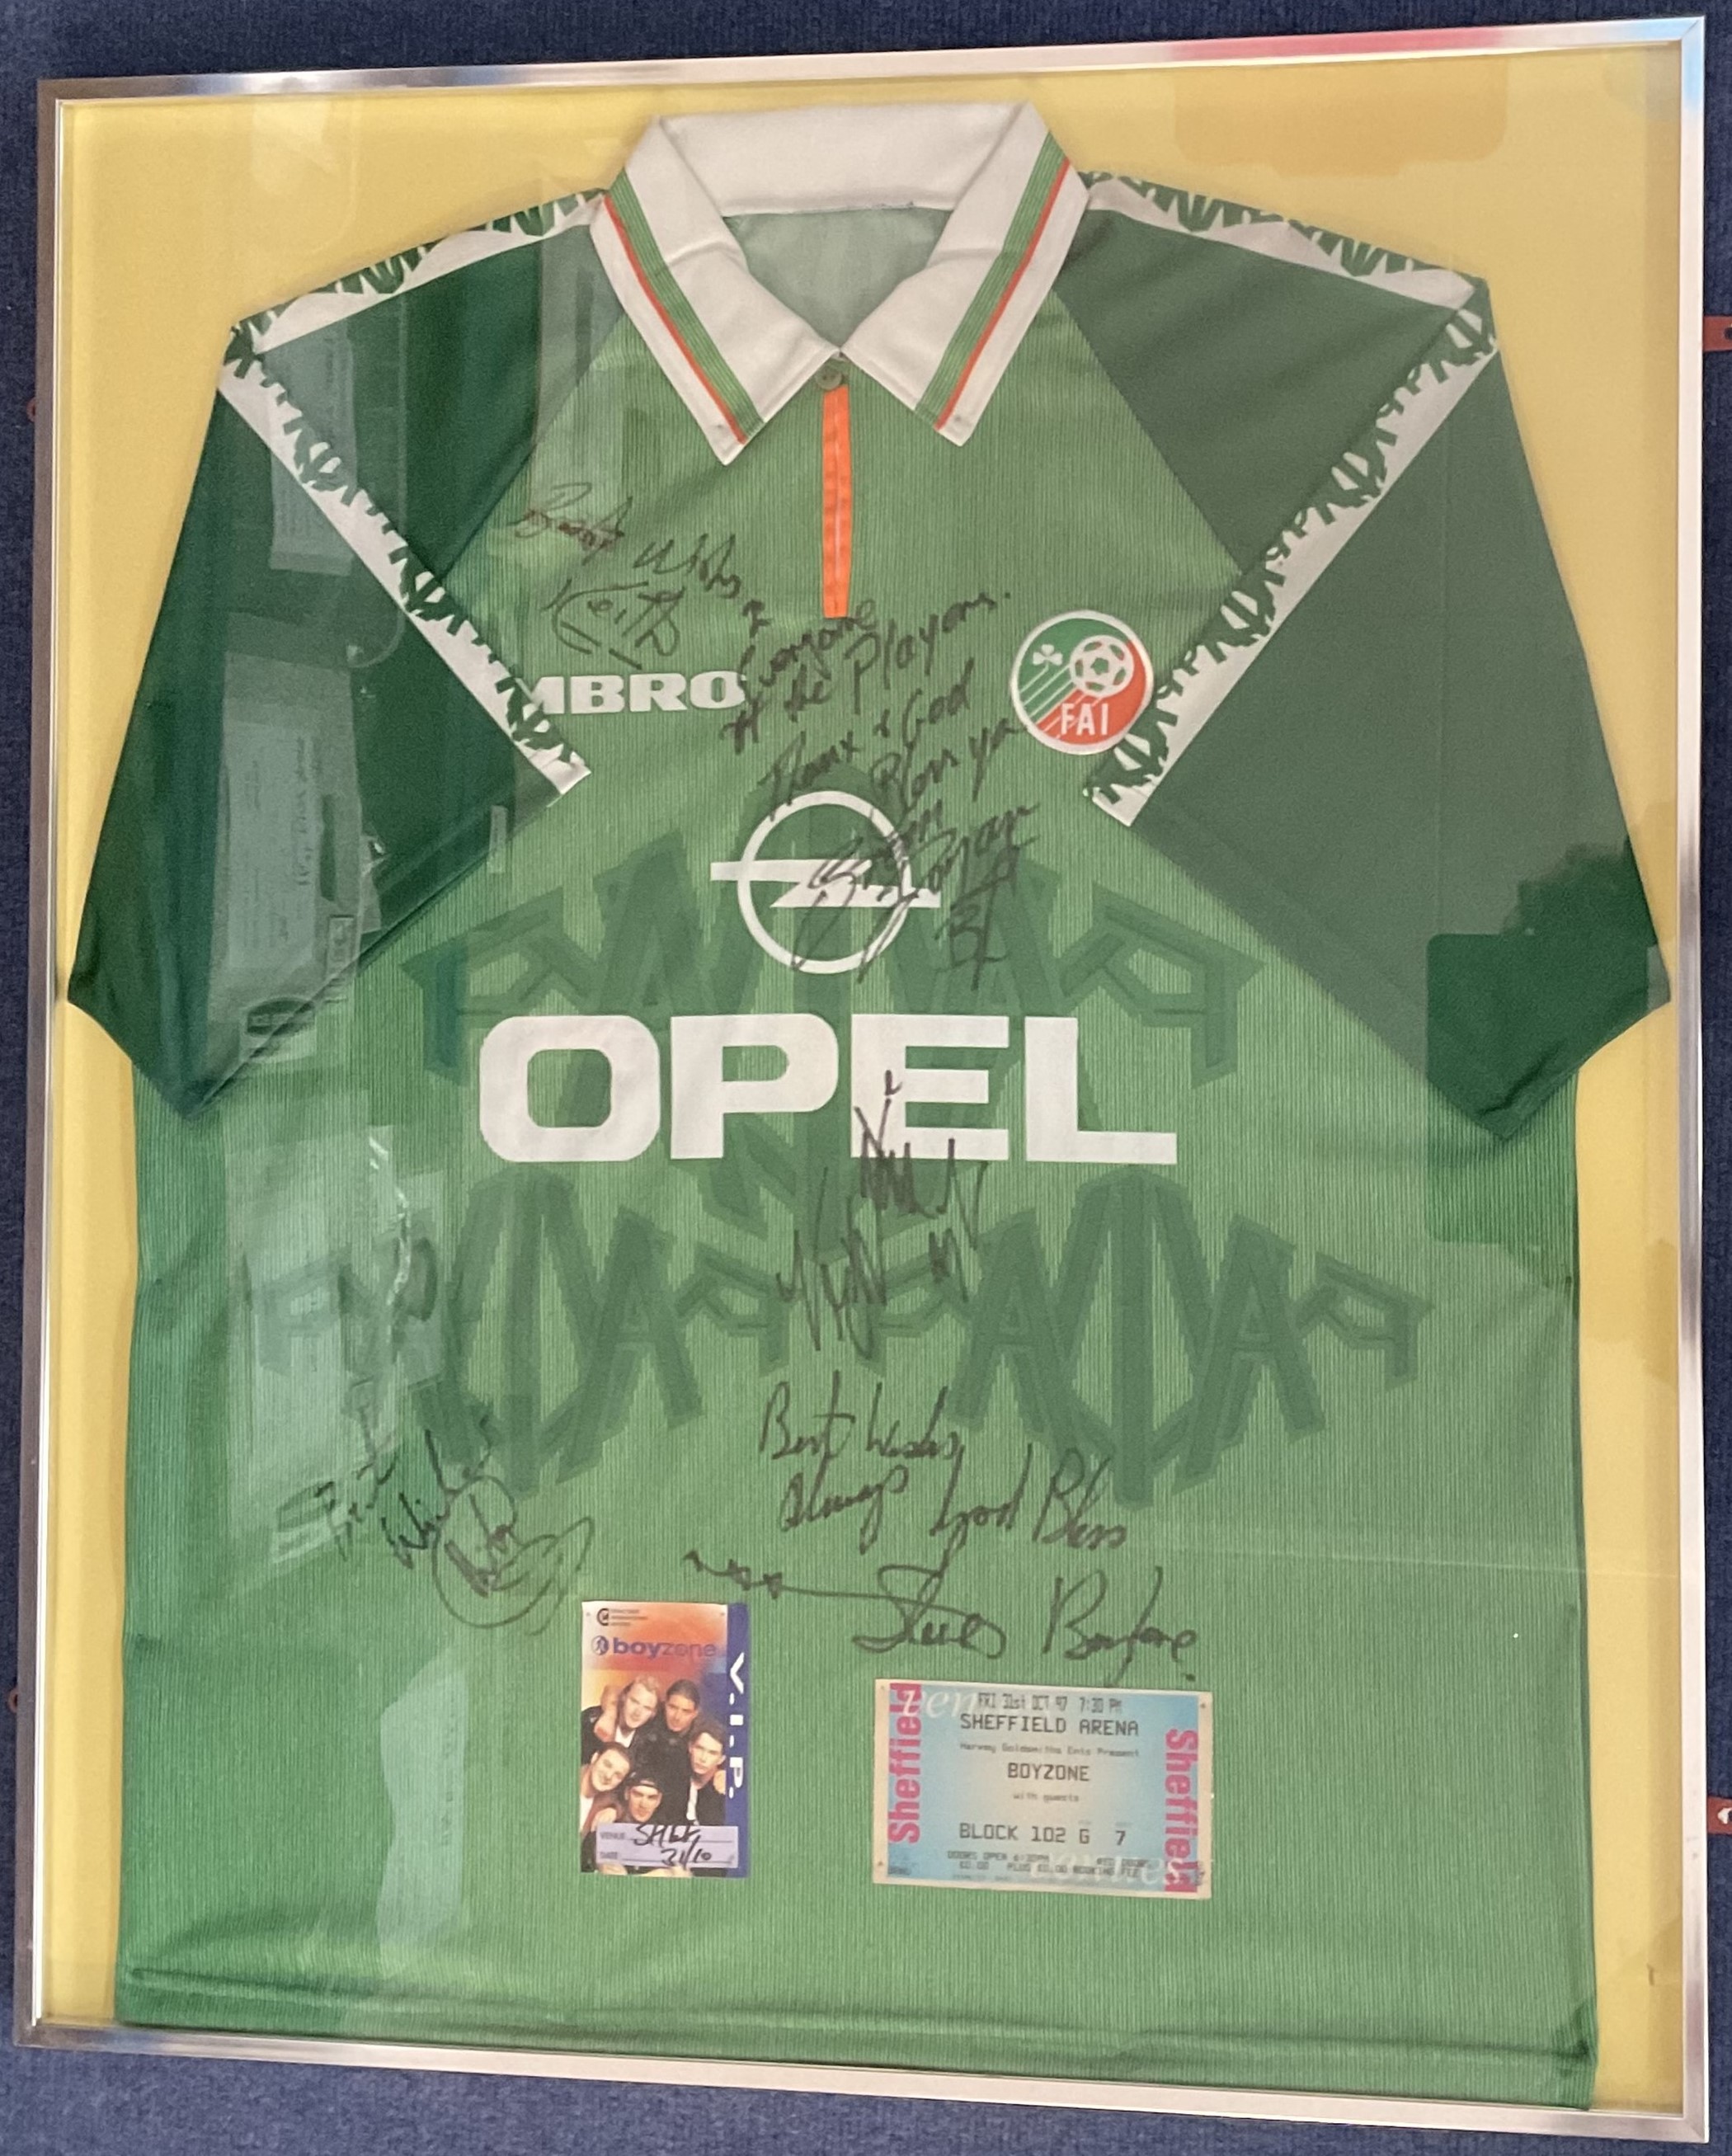 Boyzone multisigned 33x28 overall mounted and framed Republic of Ireland Football Shirt includes all